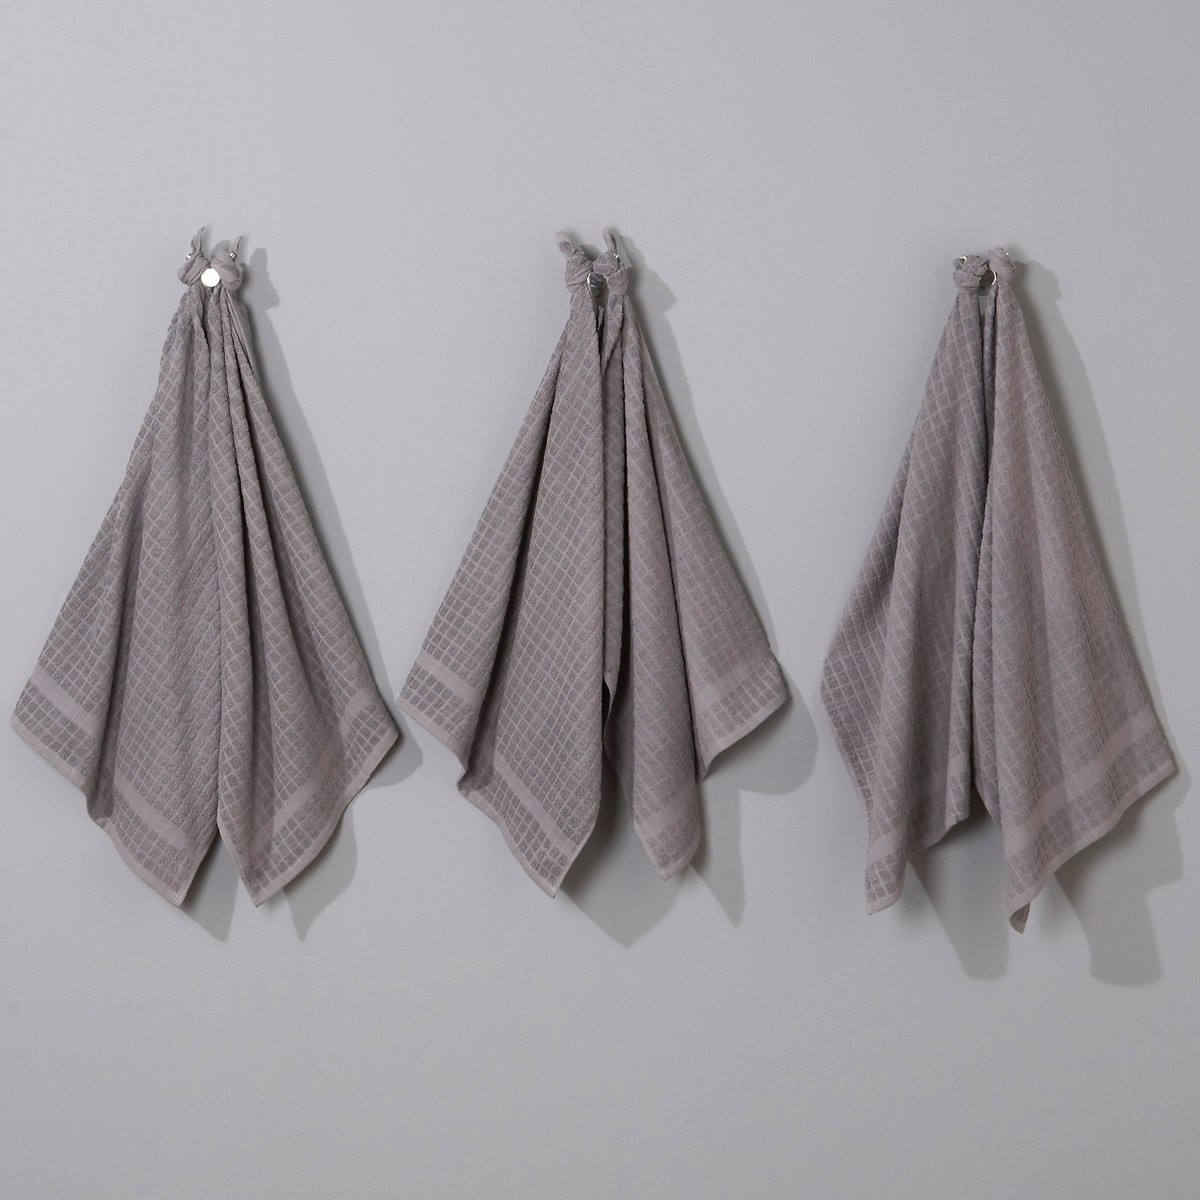 Set of 6 Absorbent and Hardwearing Tea Towels